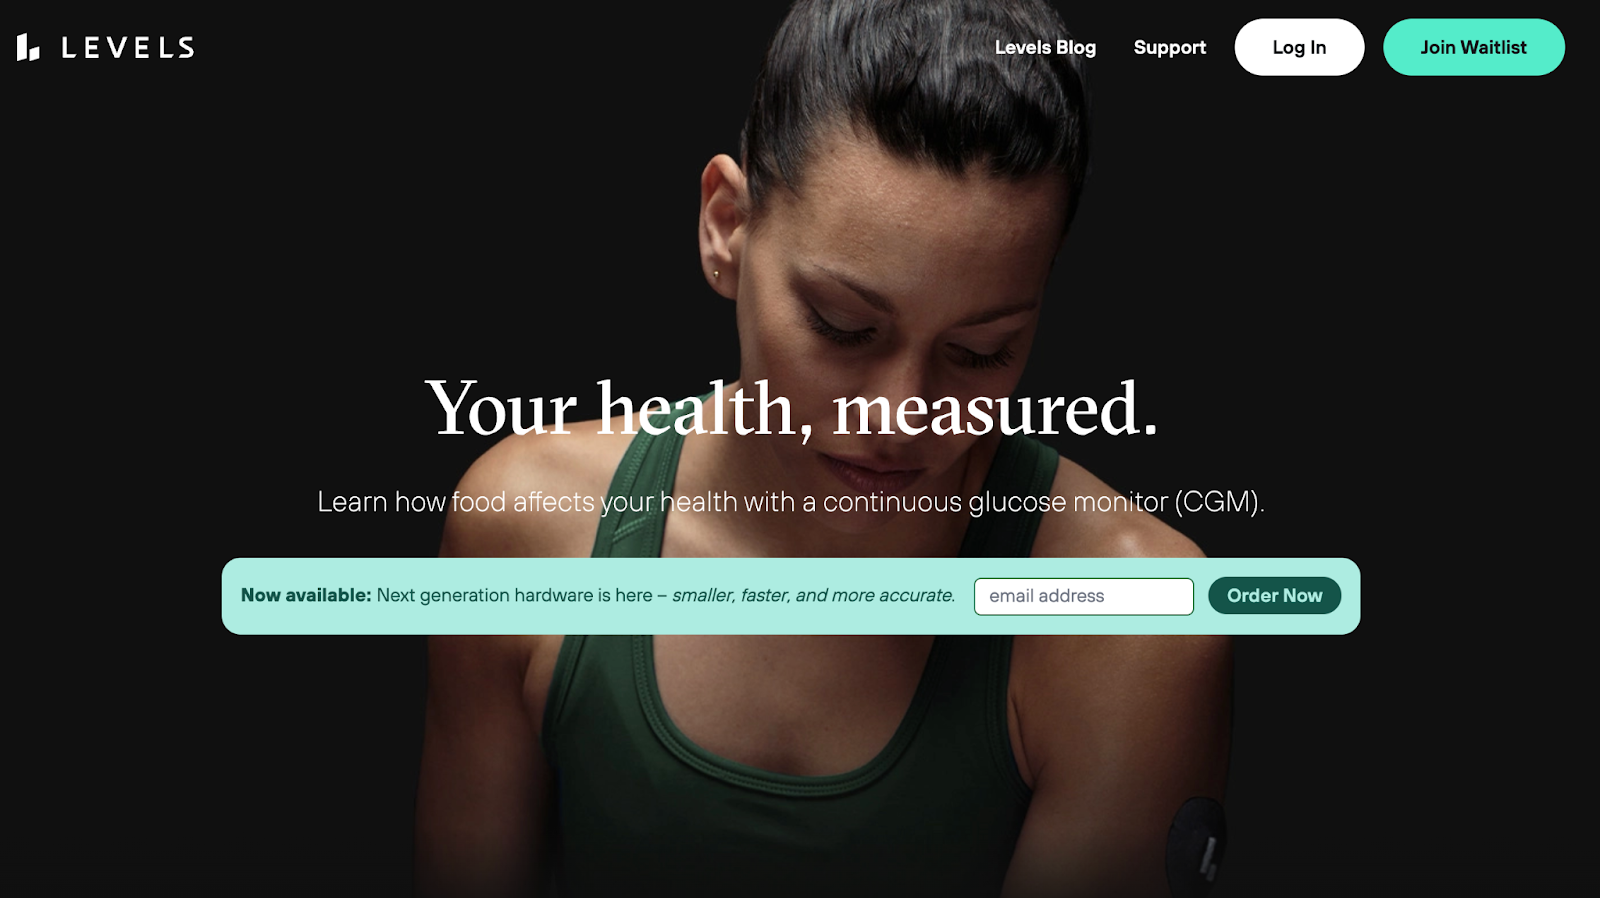 Levels health tech website for growth marketing